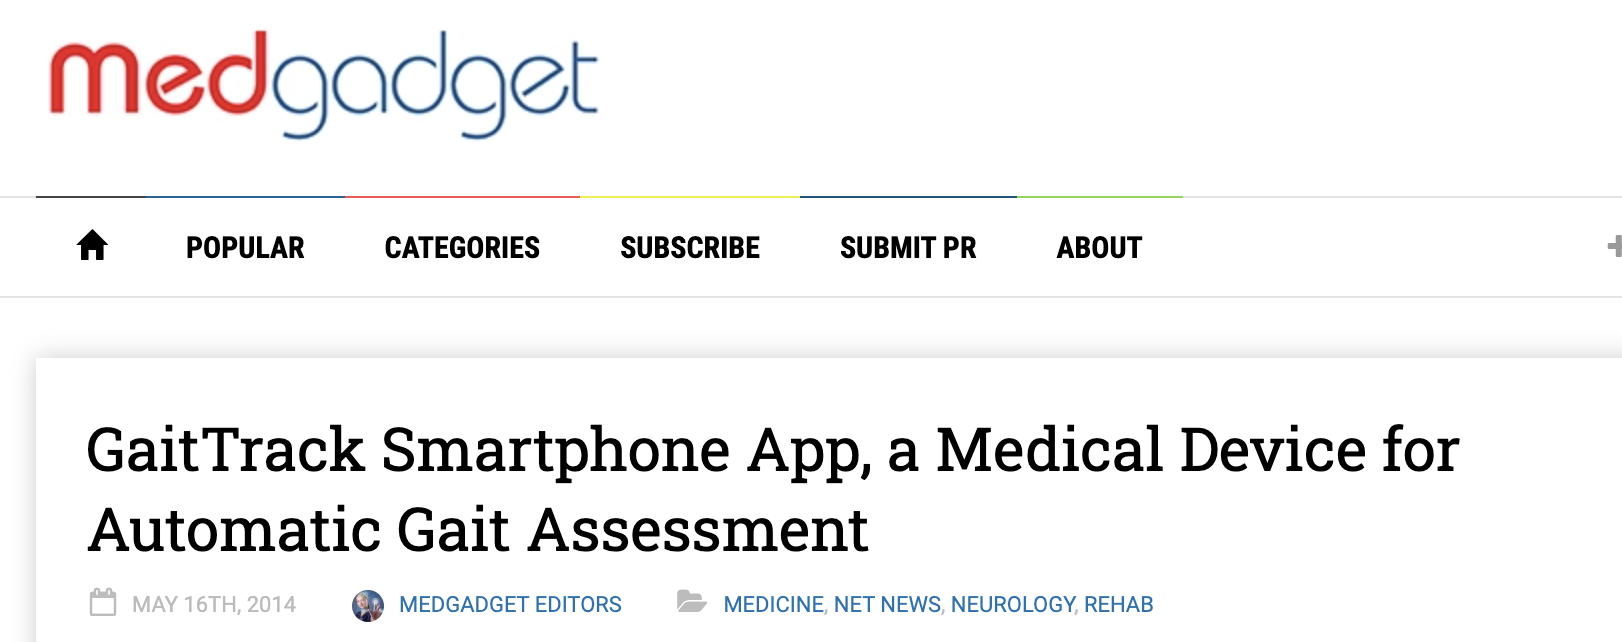 GaitTrack Smartphone App, a Medical Device for Automatic Gait Assessment, Medgadget